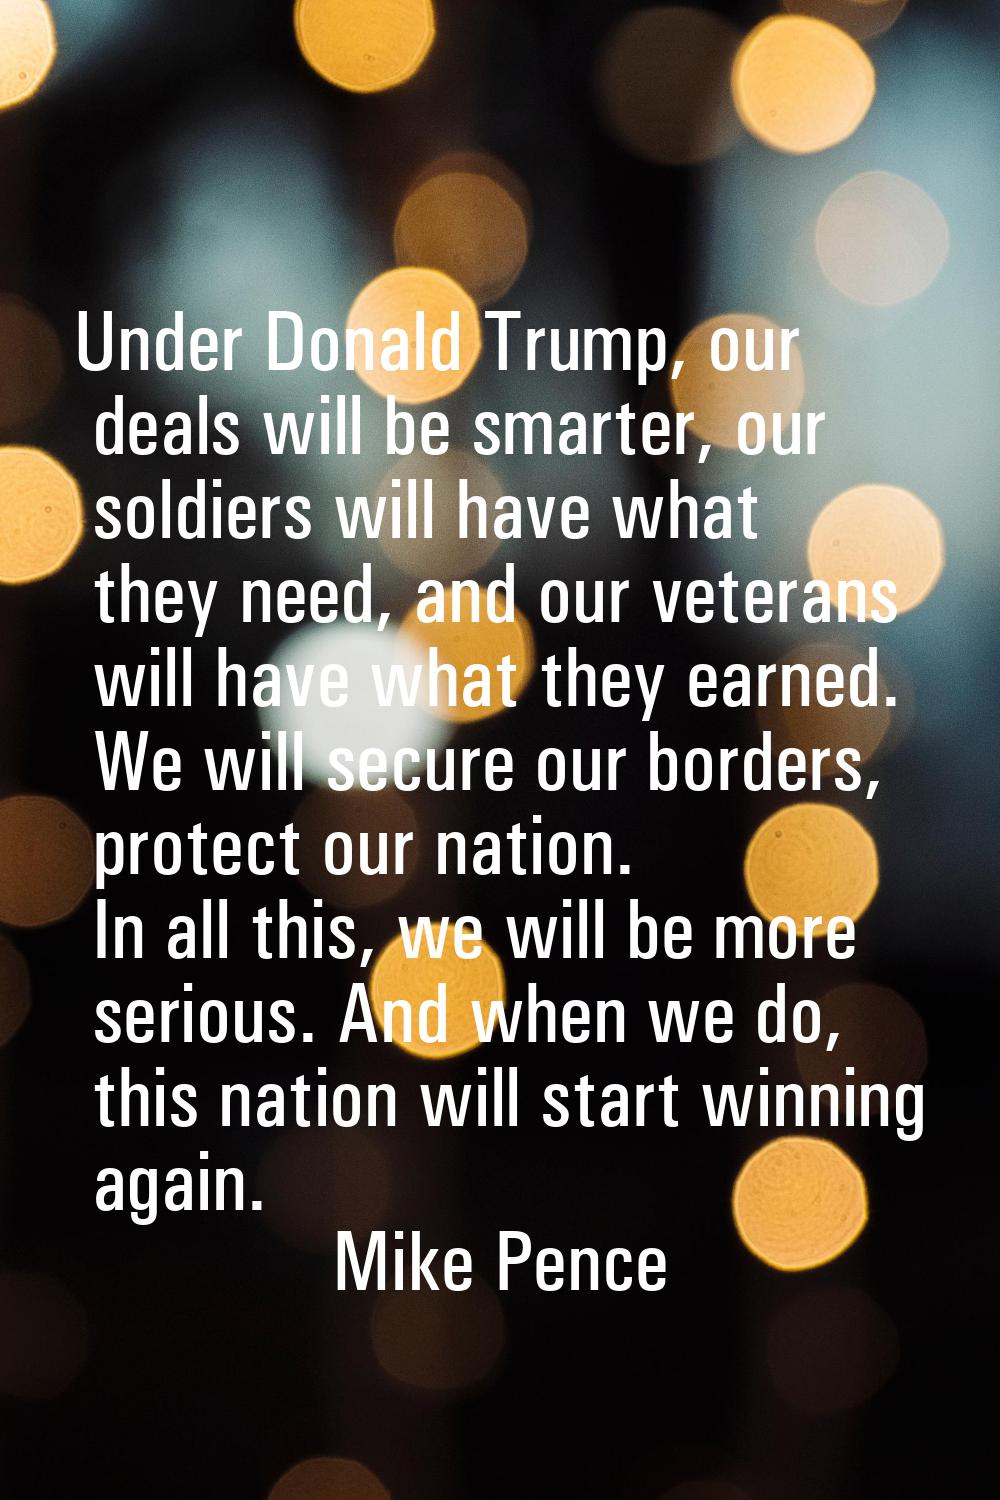 Under Donald Trump, our deals will be smarter, our soldiers will have what they need, and our veter